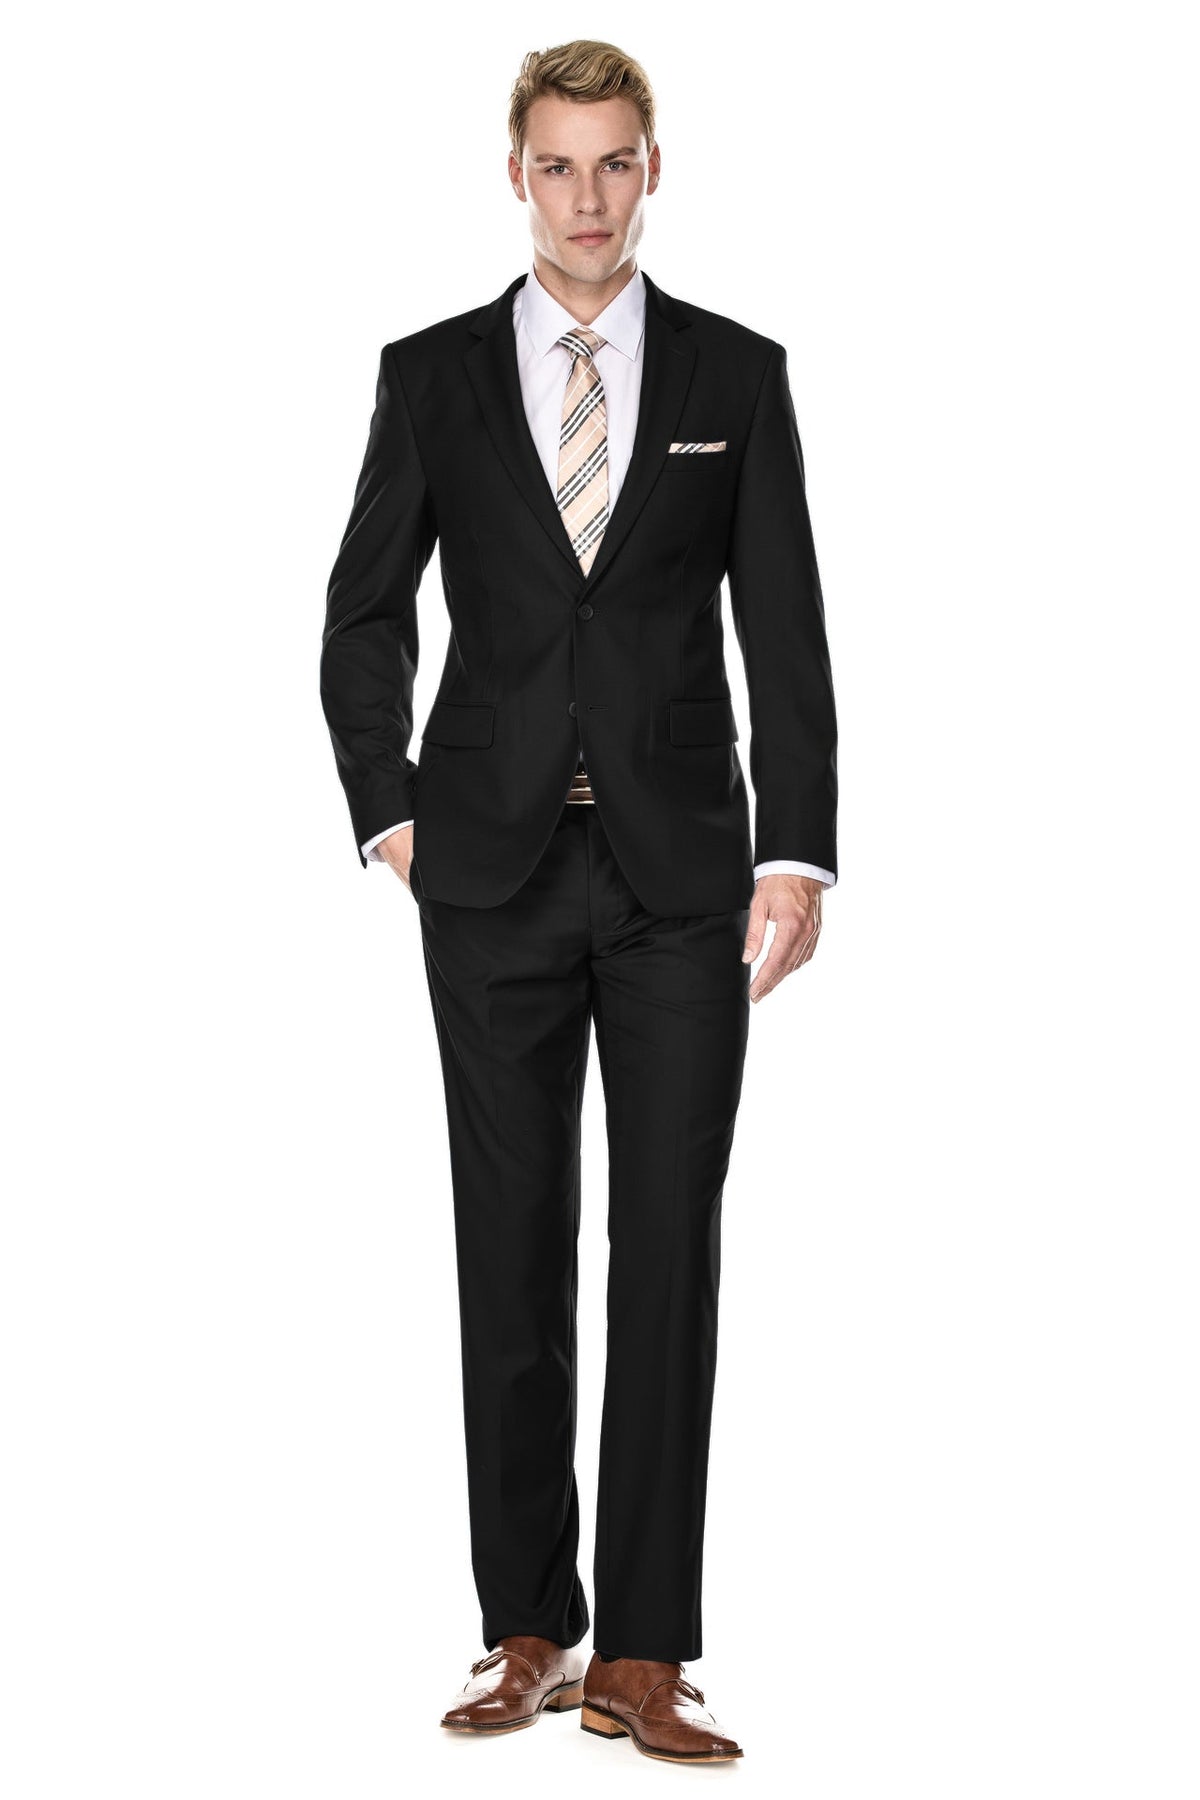 Men's Suits Classic Fit - 3 Piece Suit Men with Single Breasted Jacket,Vest  and Pant for Wedding Prom Party Suit(Black,S) at Amazon Men's Clothing store